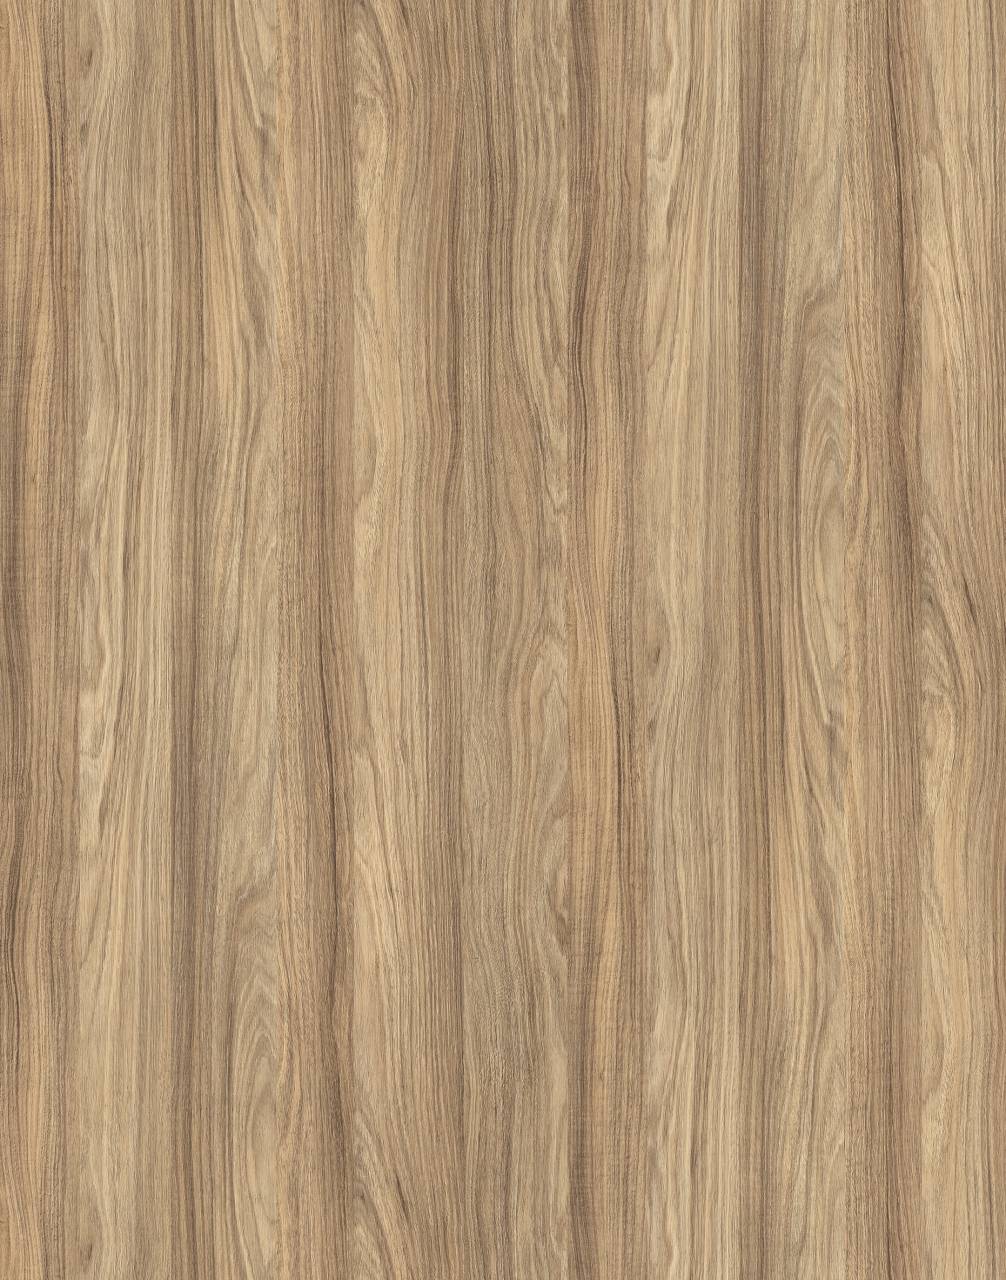 Barley Blackwood SN HPL with textured surface and warm medium brown tones for a rustic and natural look.